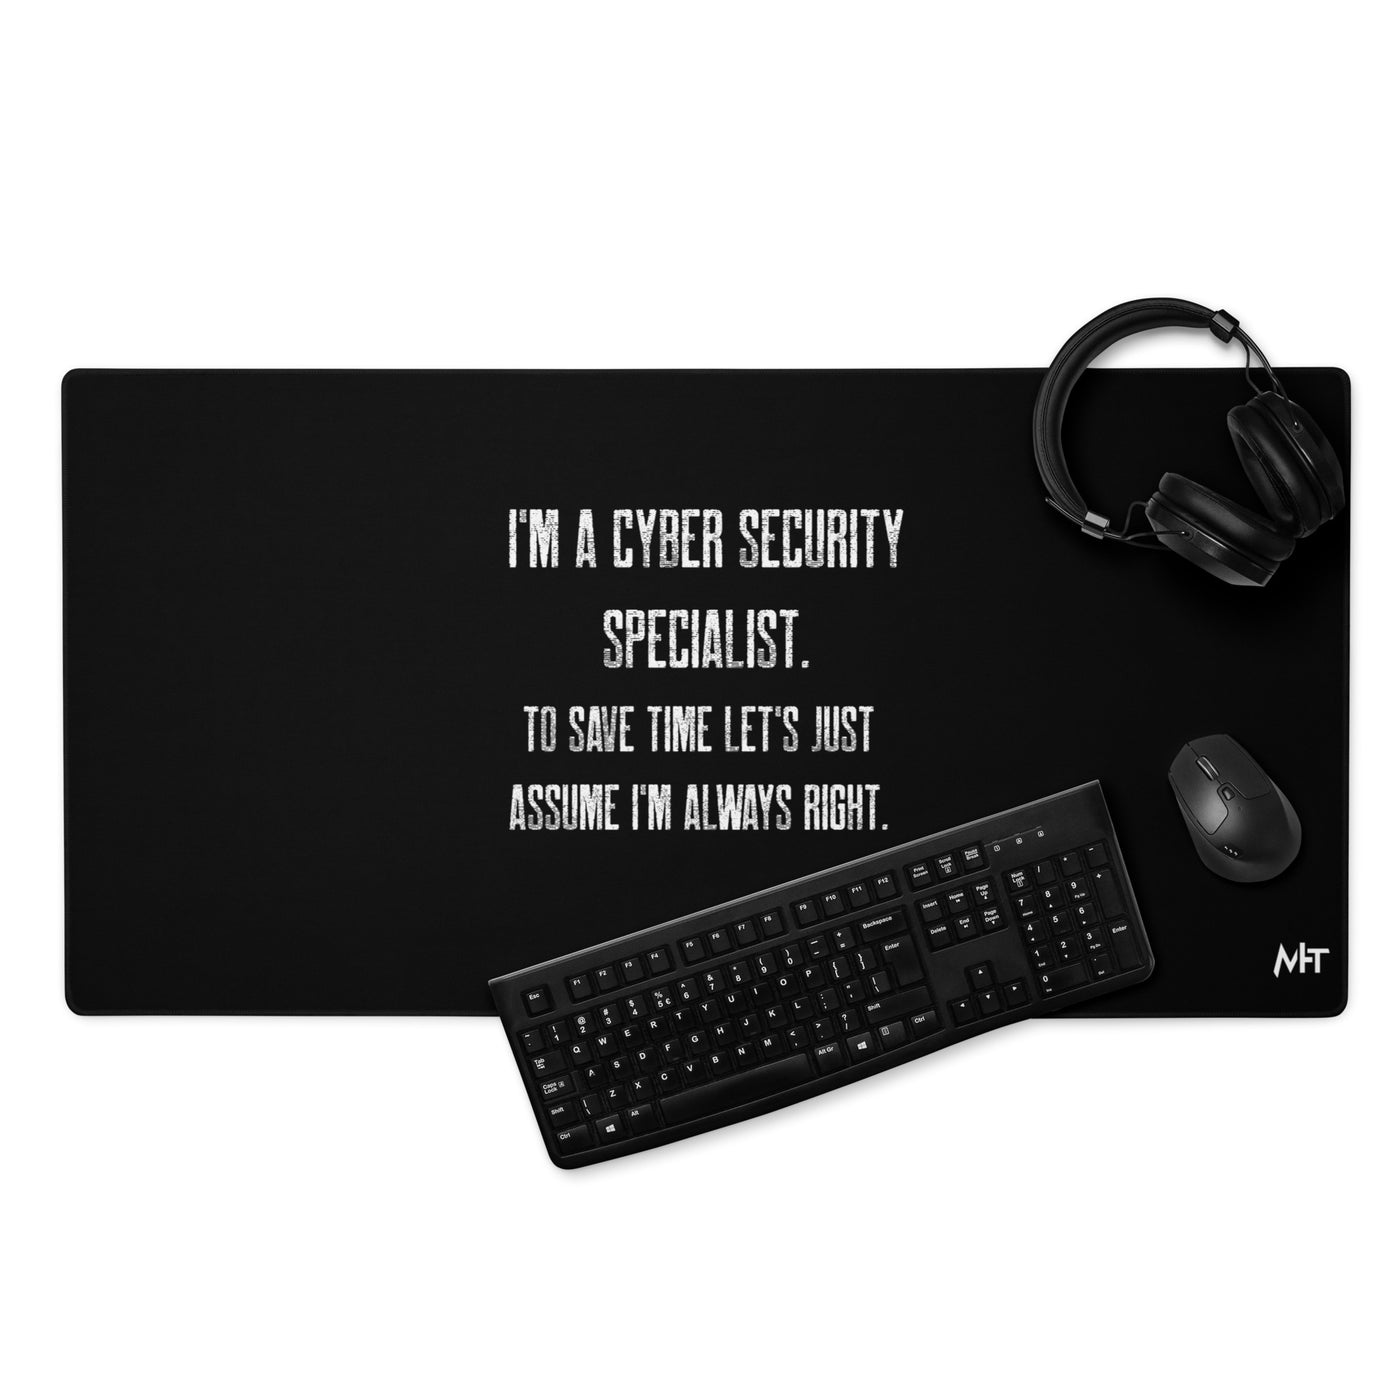 I am a Cyber Security Specialist - Desk Mat